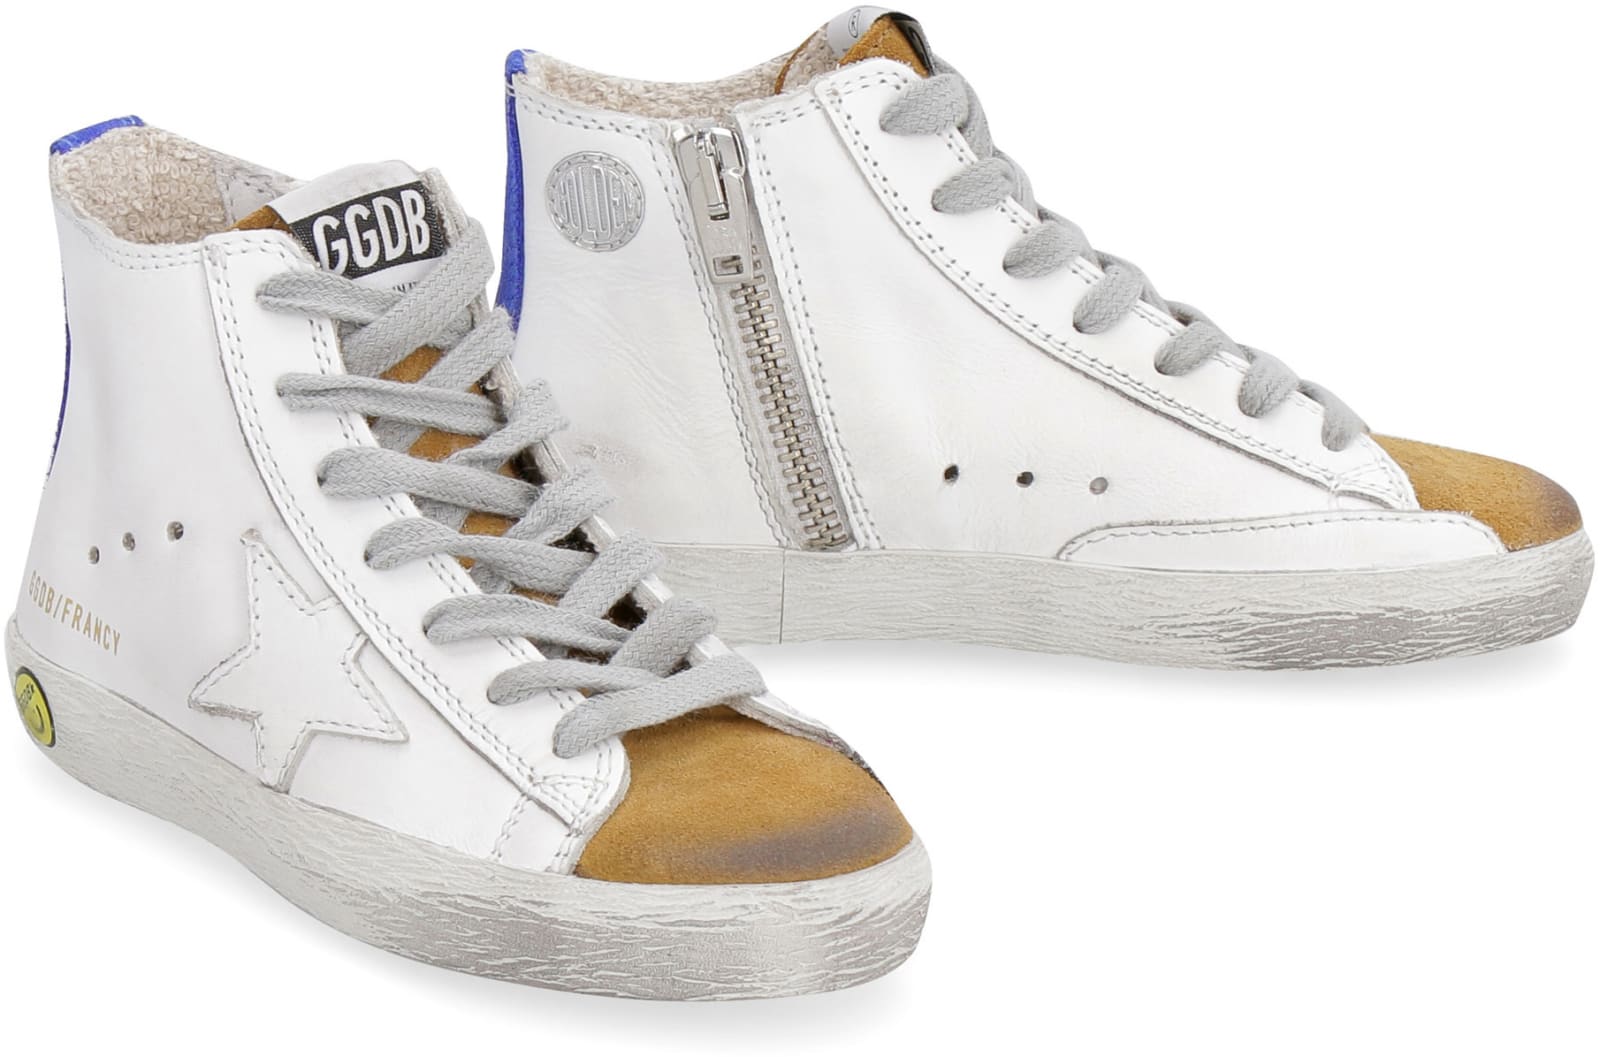 Golden Goose Shoes | italist, ALWAYS LIKE A SALE